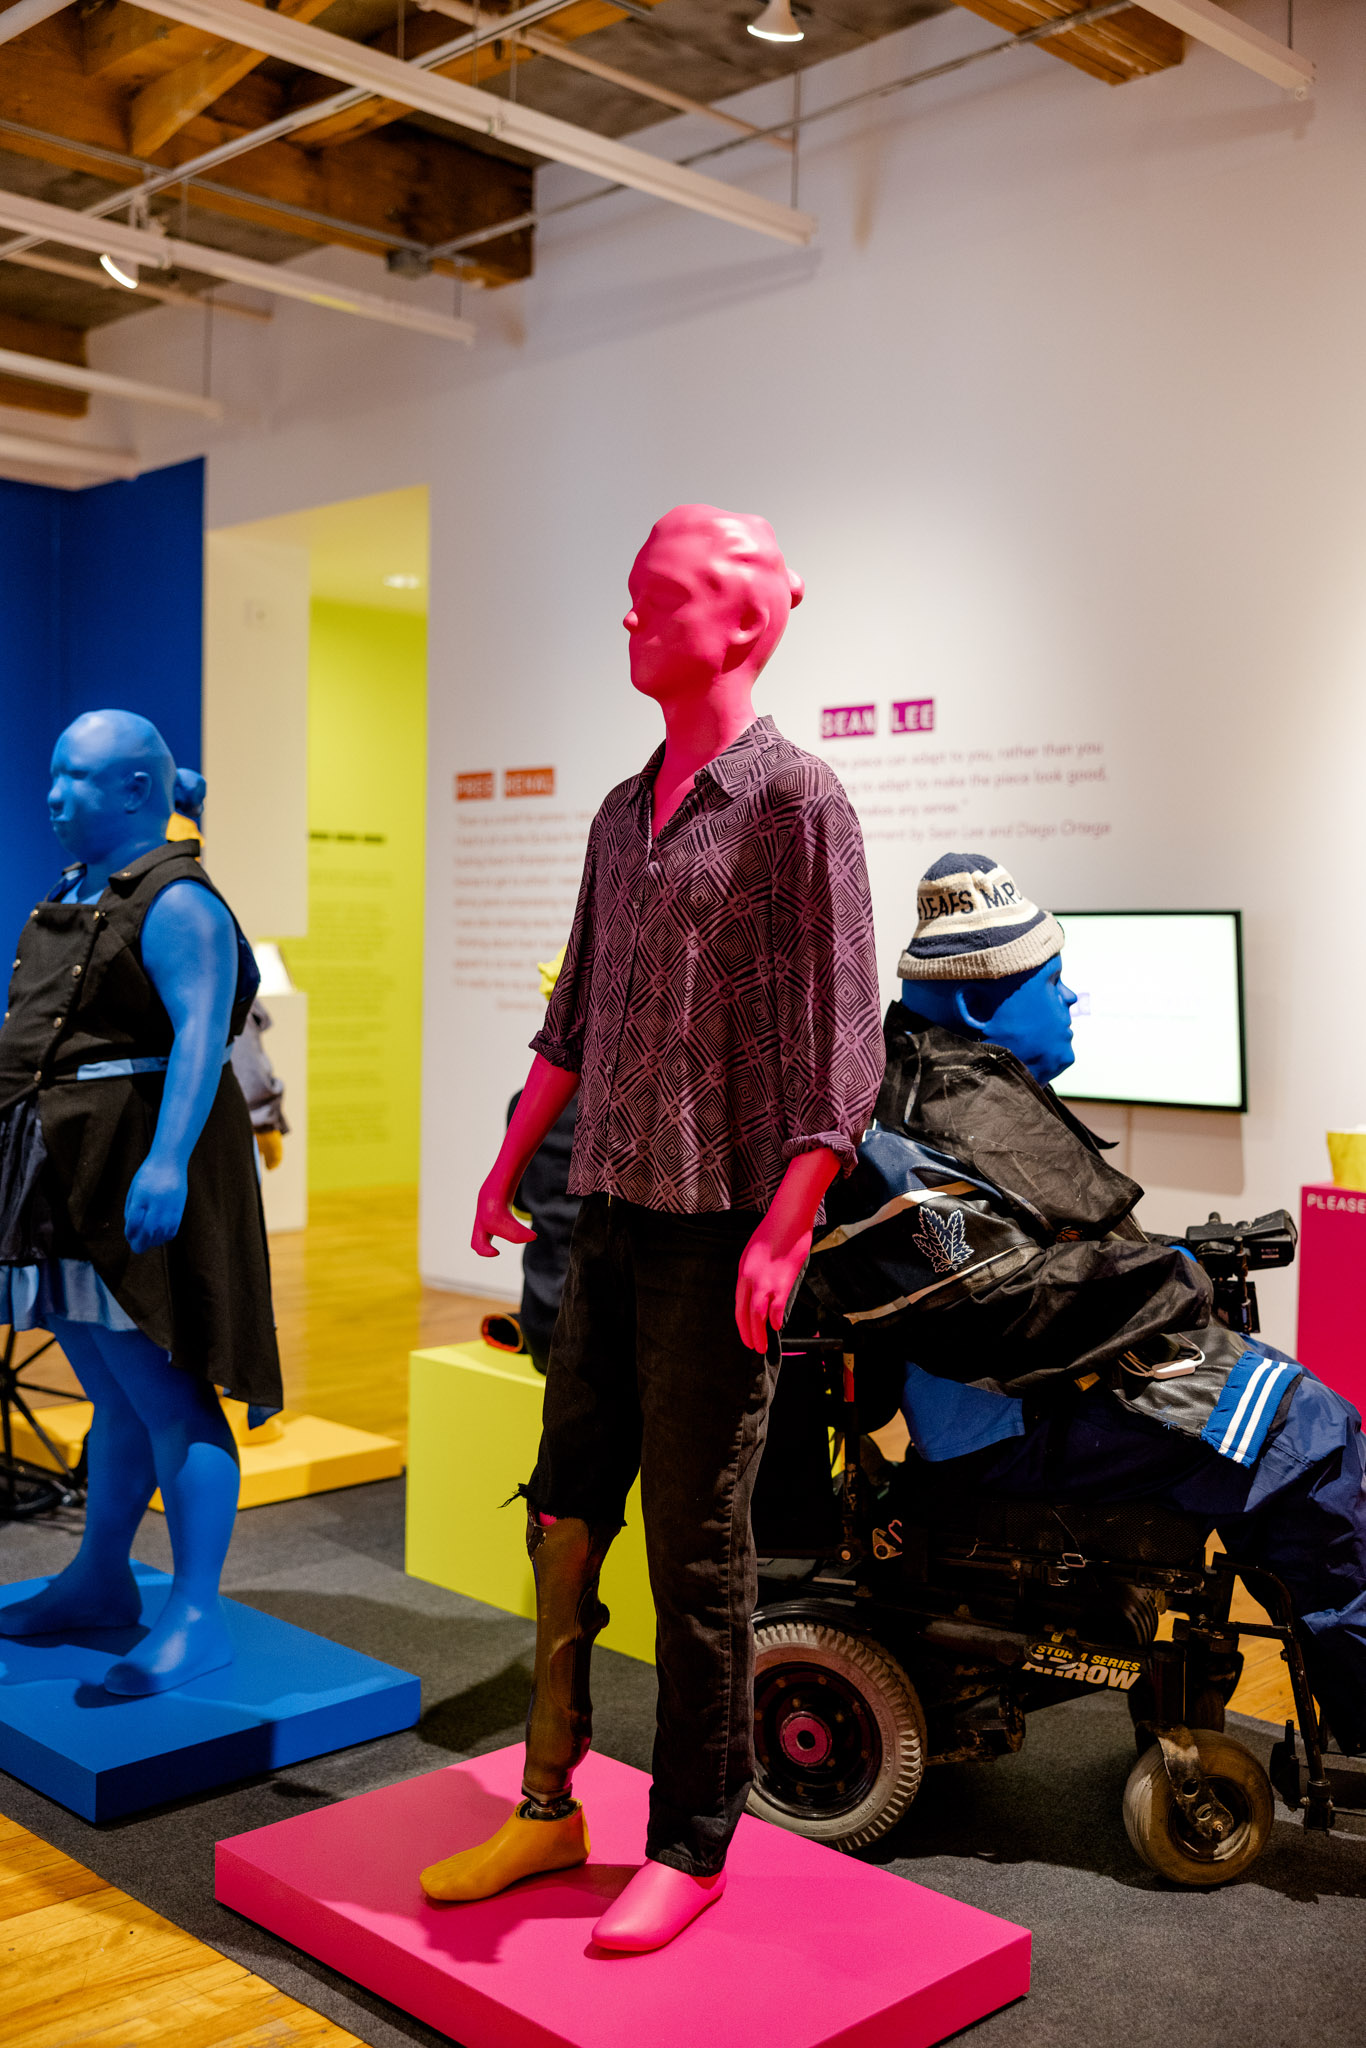 A bright pink mannequin stands in a gallery setting wearing a blousy top and jeans that show a prosthetic leg.